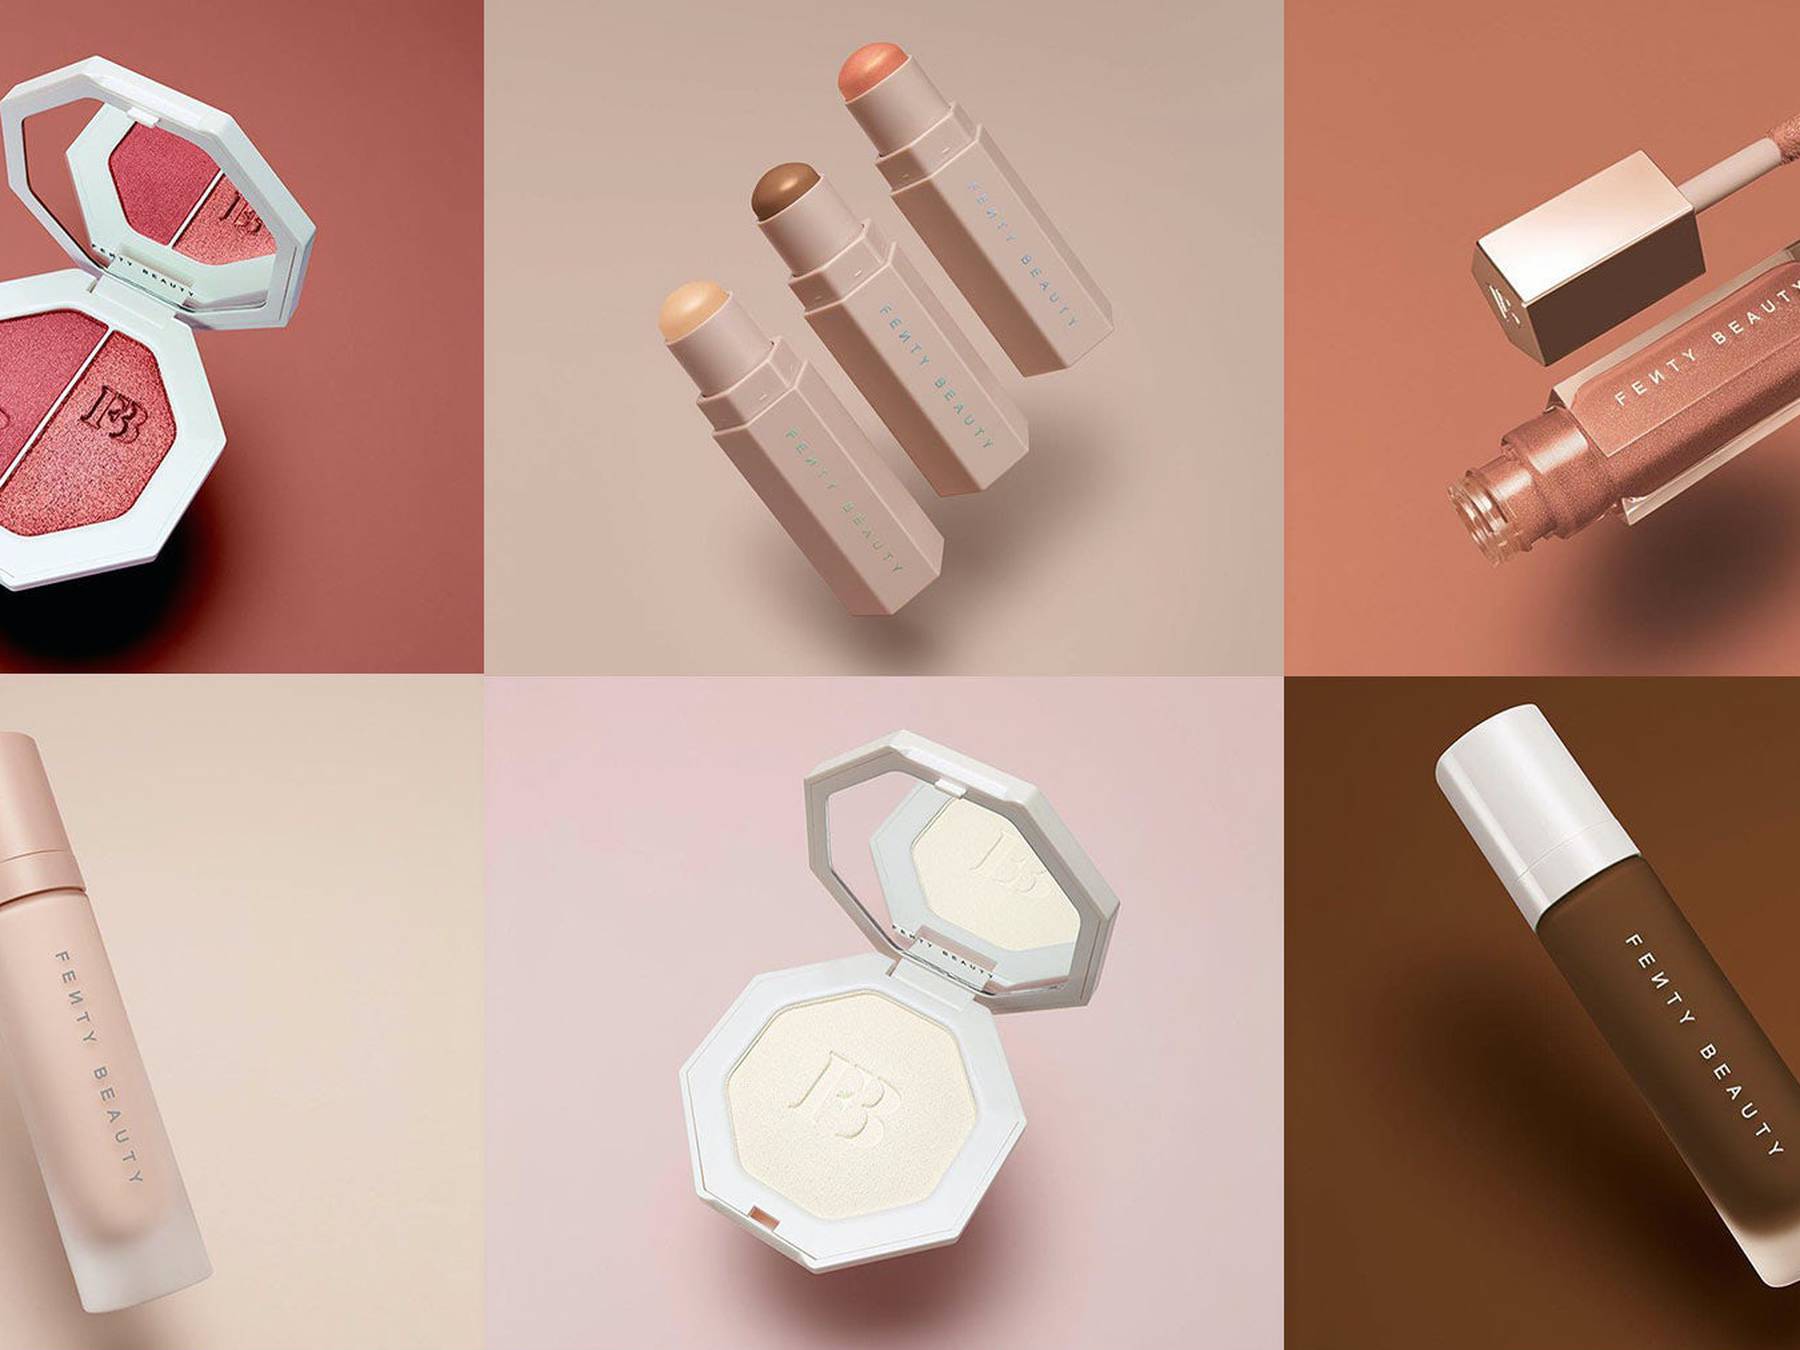 LVMH beauty brand, Fresh, engaged MOSS to provide editing and post